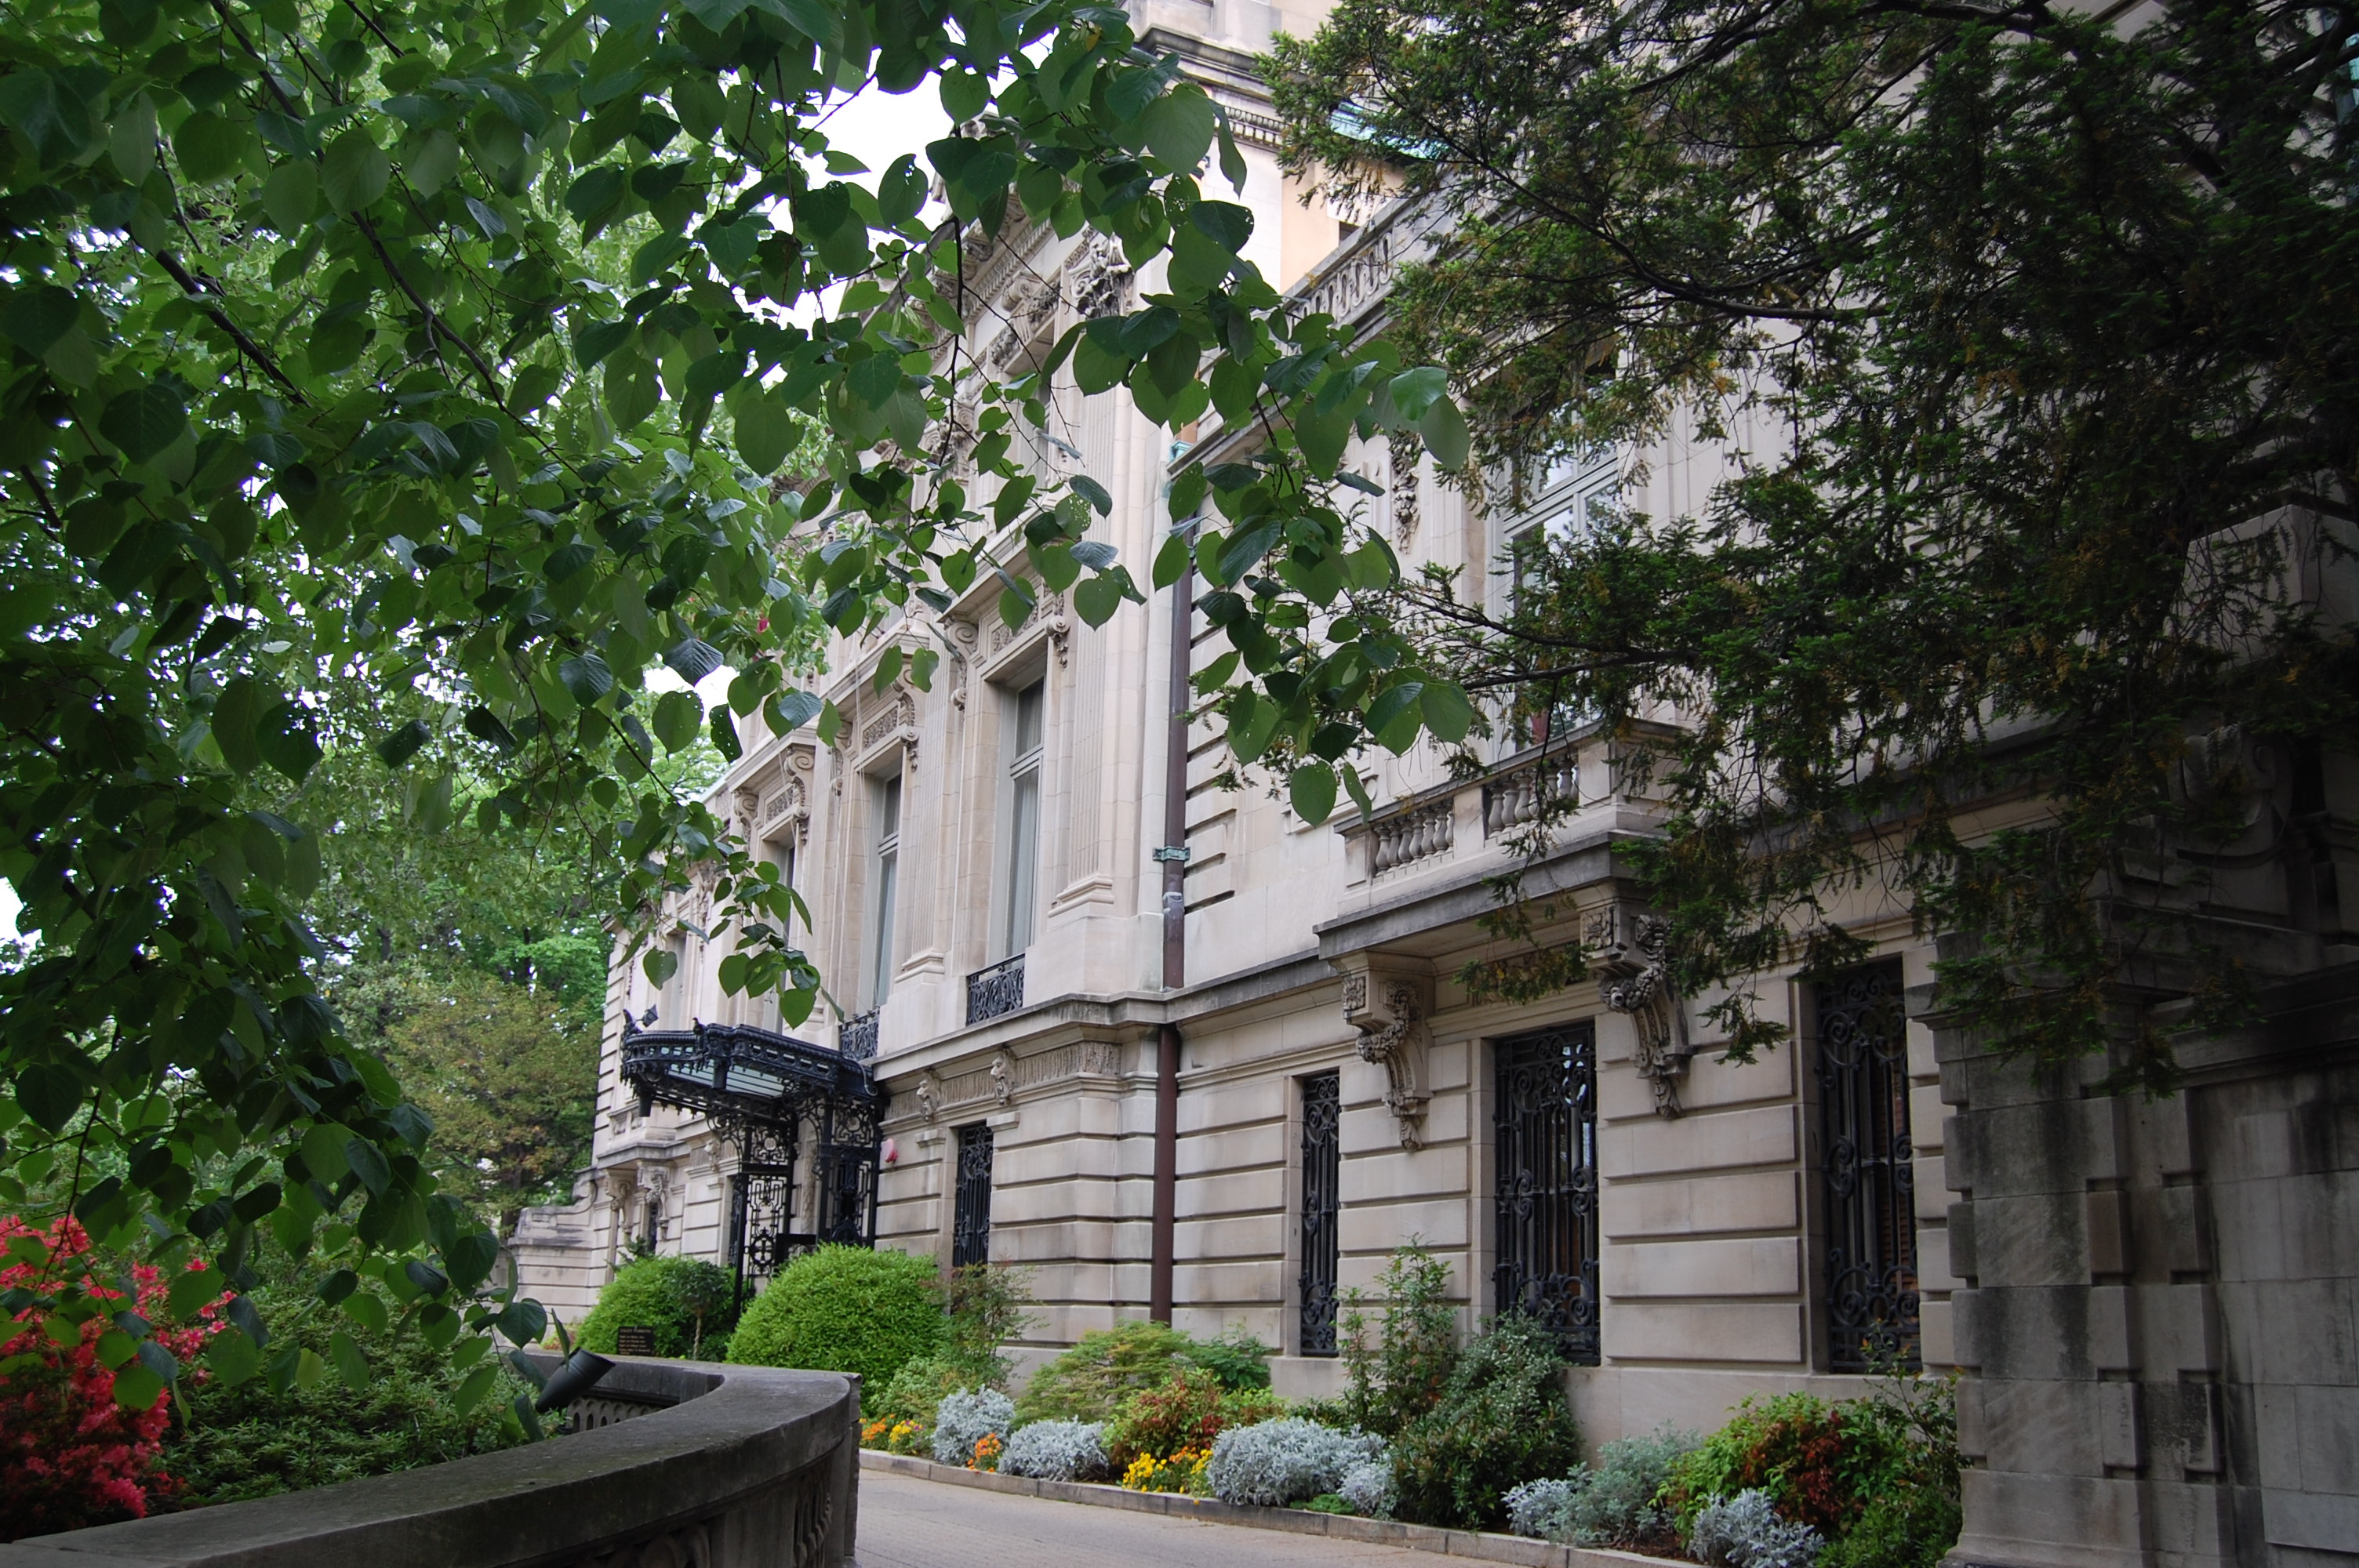 The front entrance of The Cosmos Club